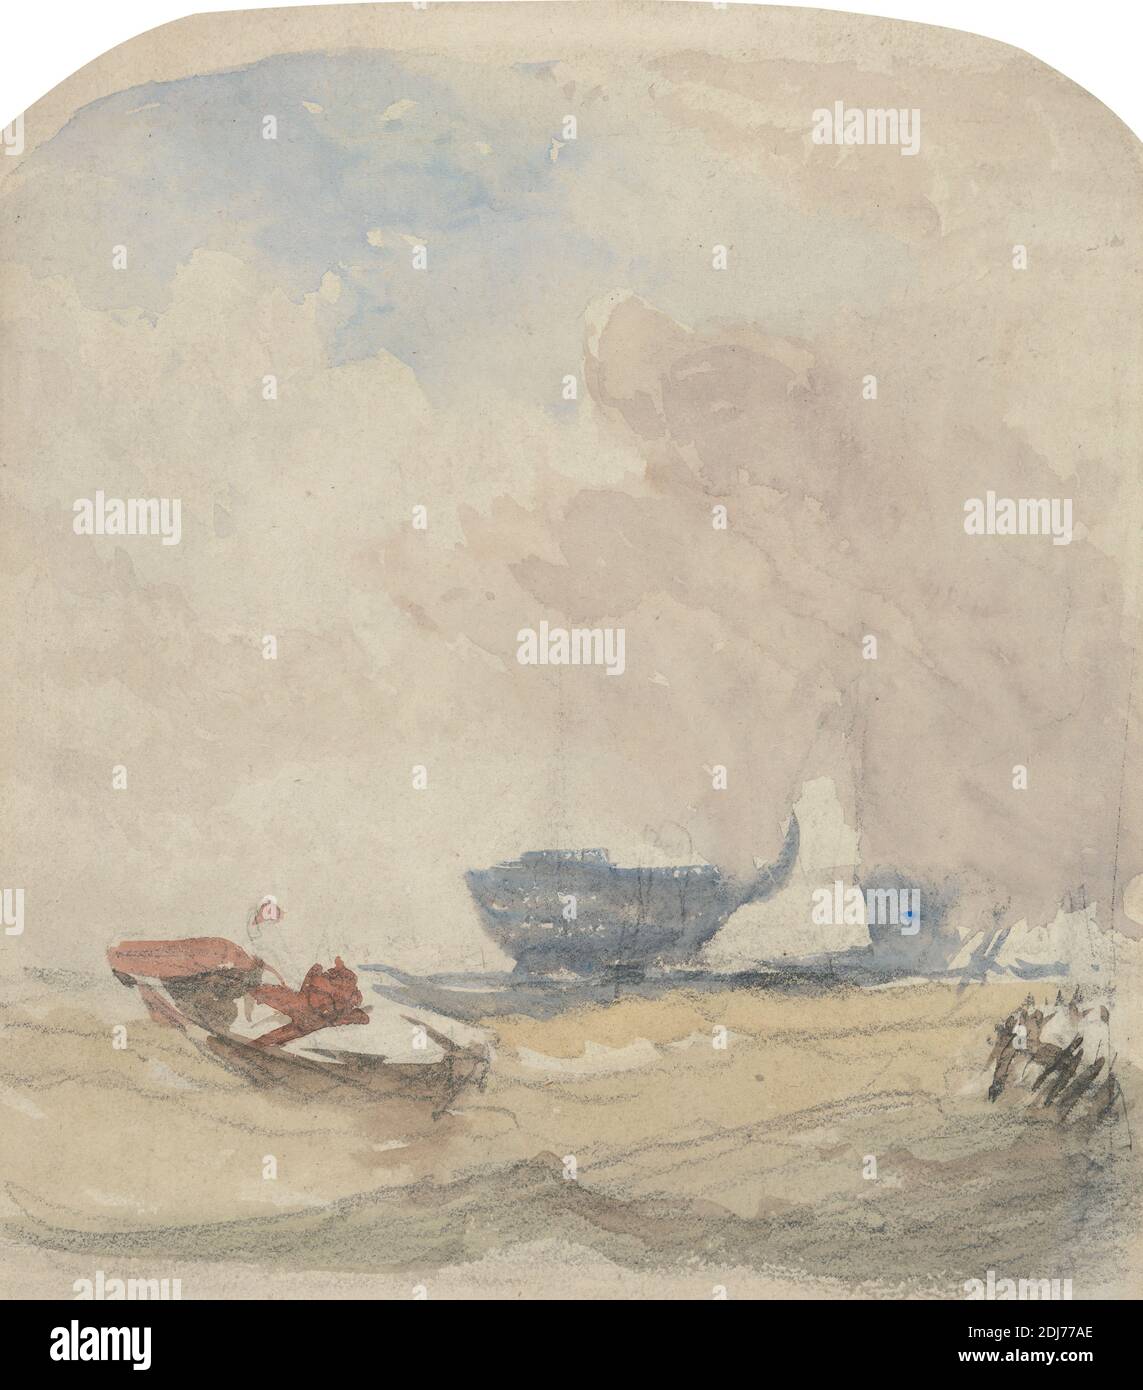 Sea Study with Hulk, Sailing Boat and Rowing Boat, David Cox, 1783–1859, British, 1830s, Black chalk, watercolor and graphite on moderately thick, slightly textured, cream wove paper, Sheet: 8 x 7 inches (20.3 x 17.8 cm), boat, marine art, seascape Stock Photo